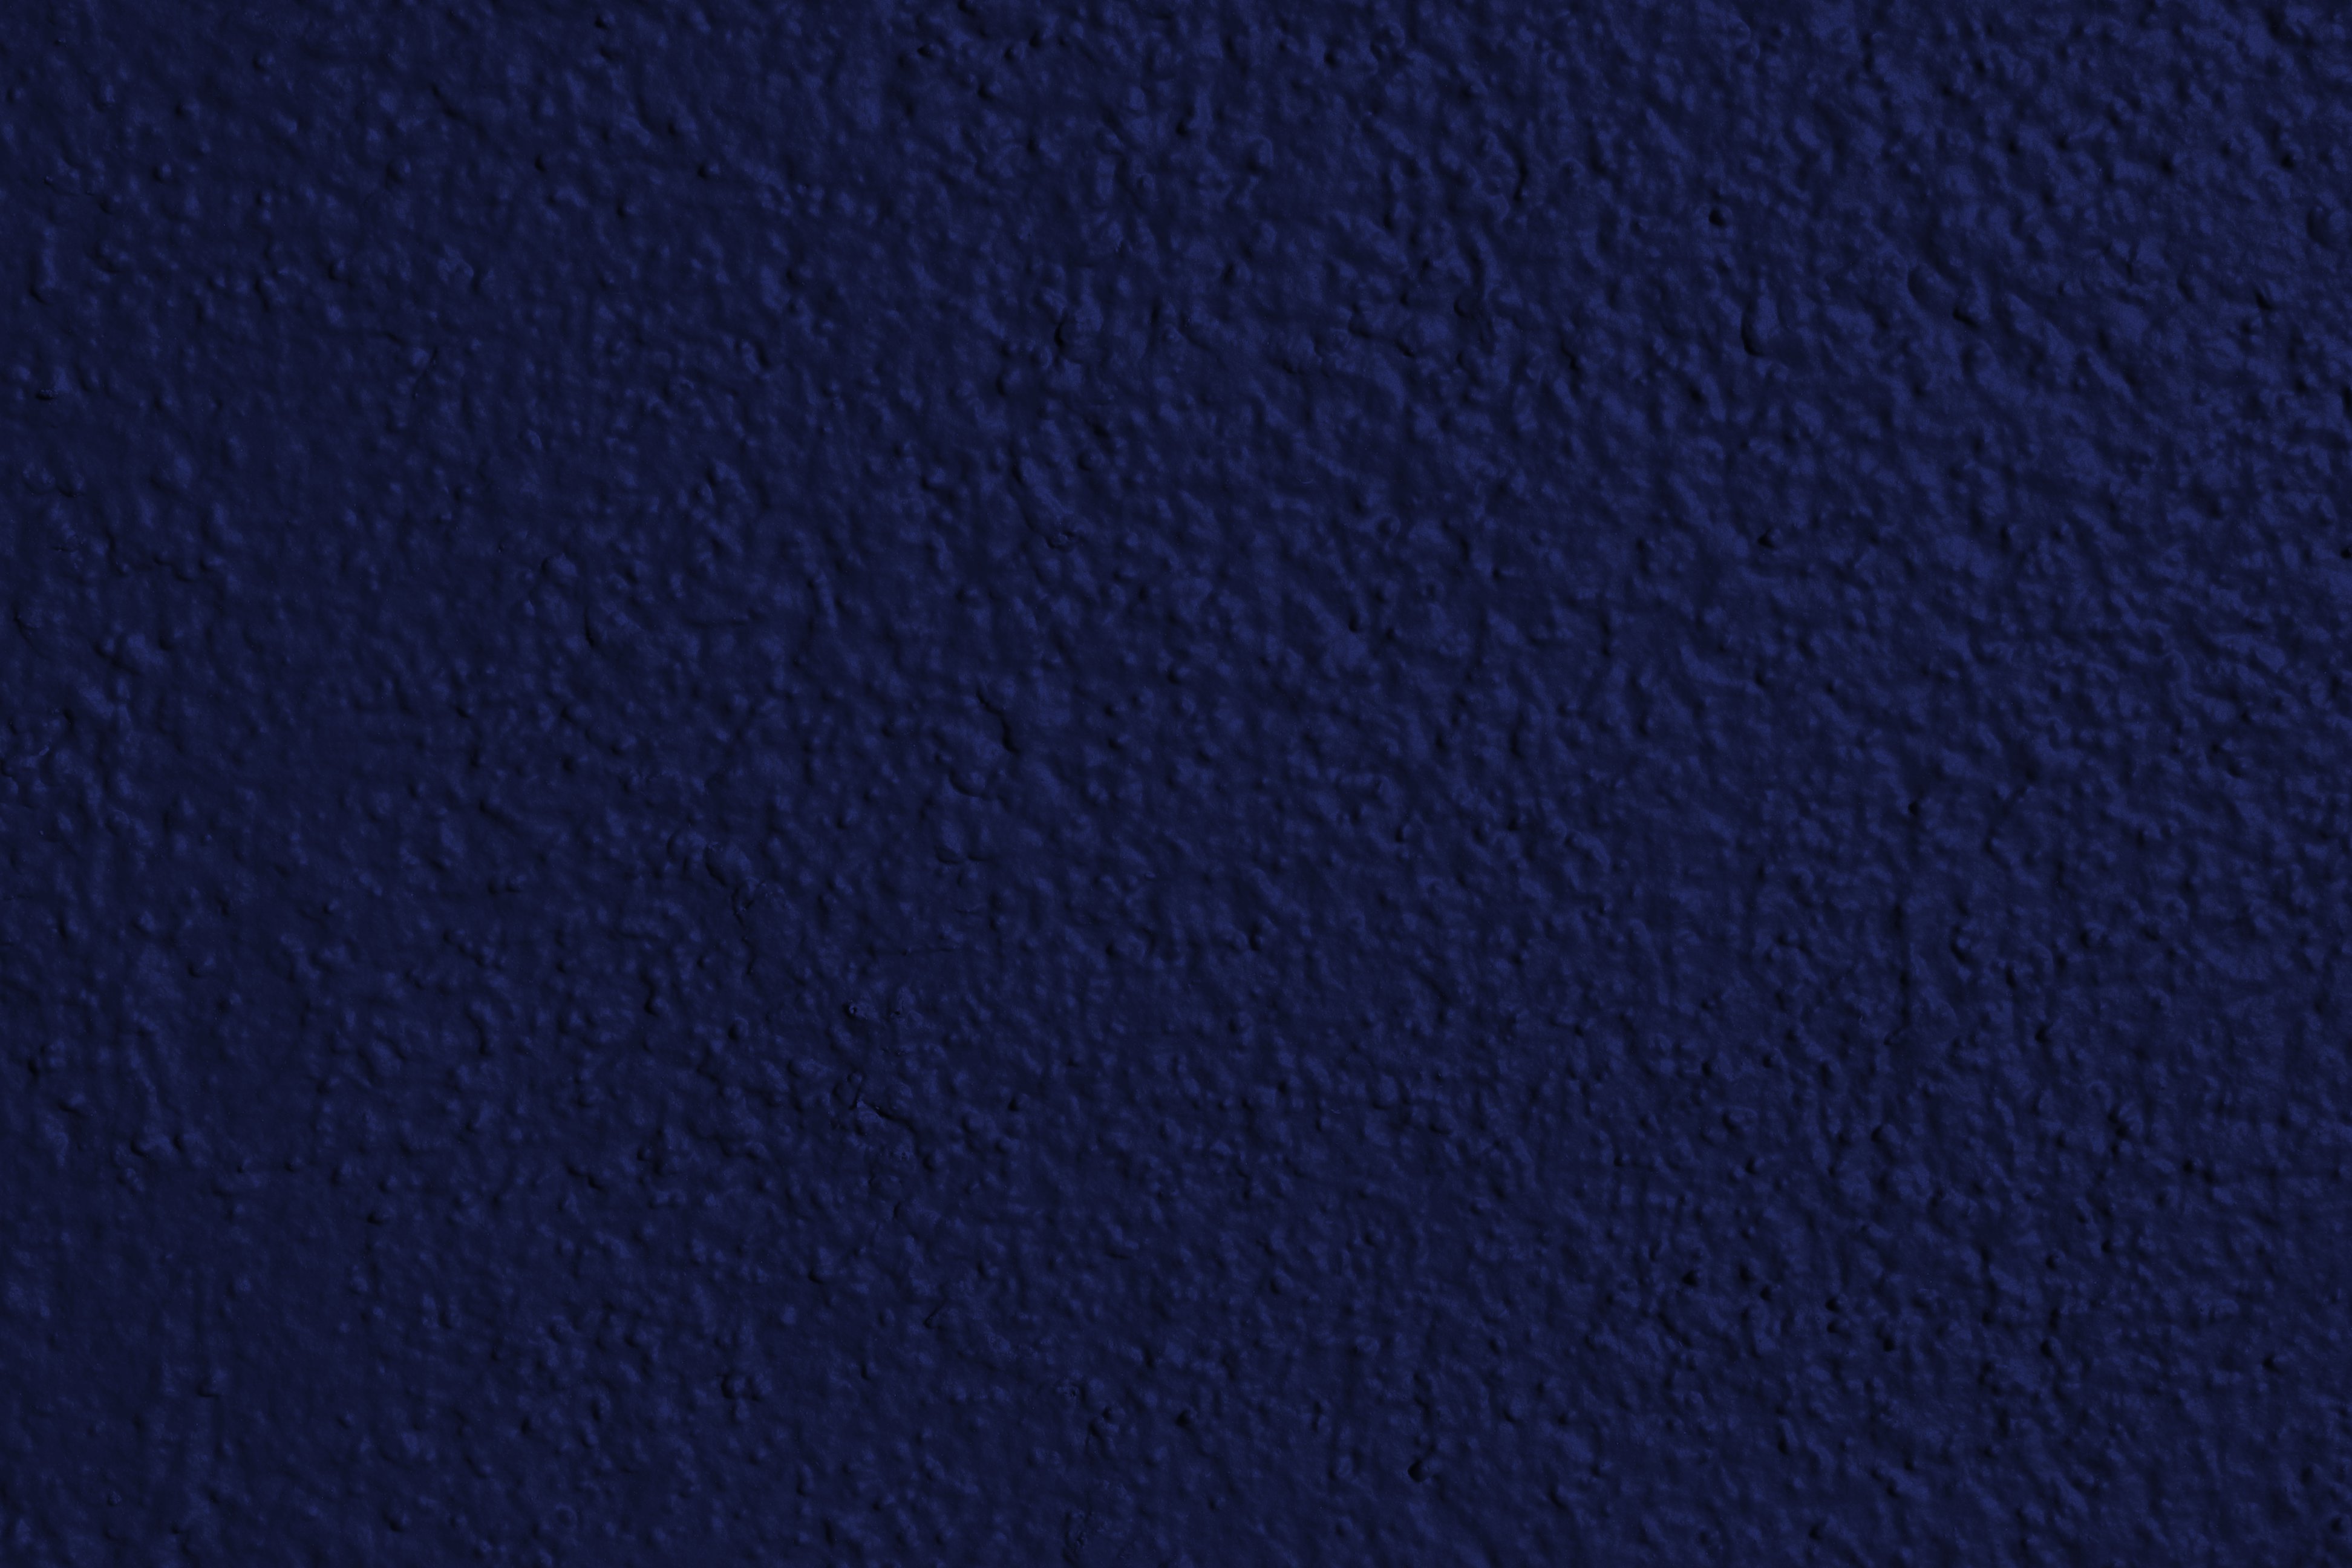 Navy Blue Painted Wall Texture Picture | Free Photograph | Photos ...